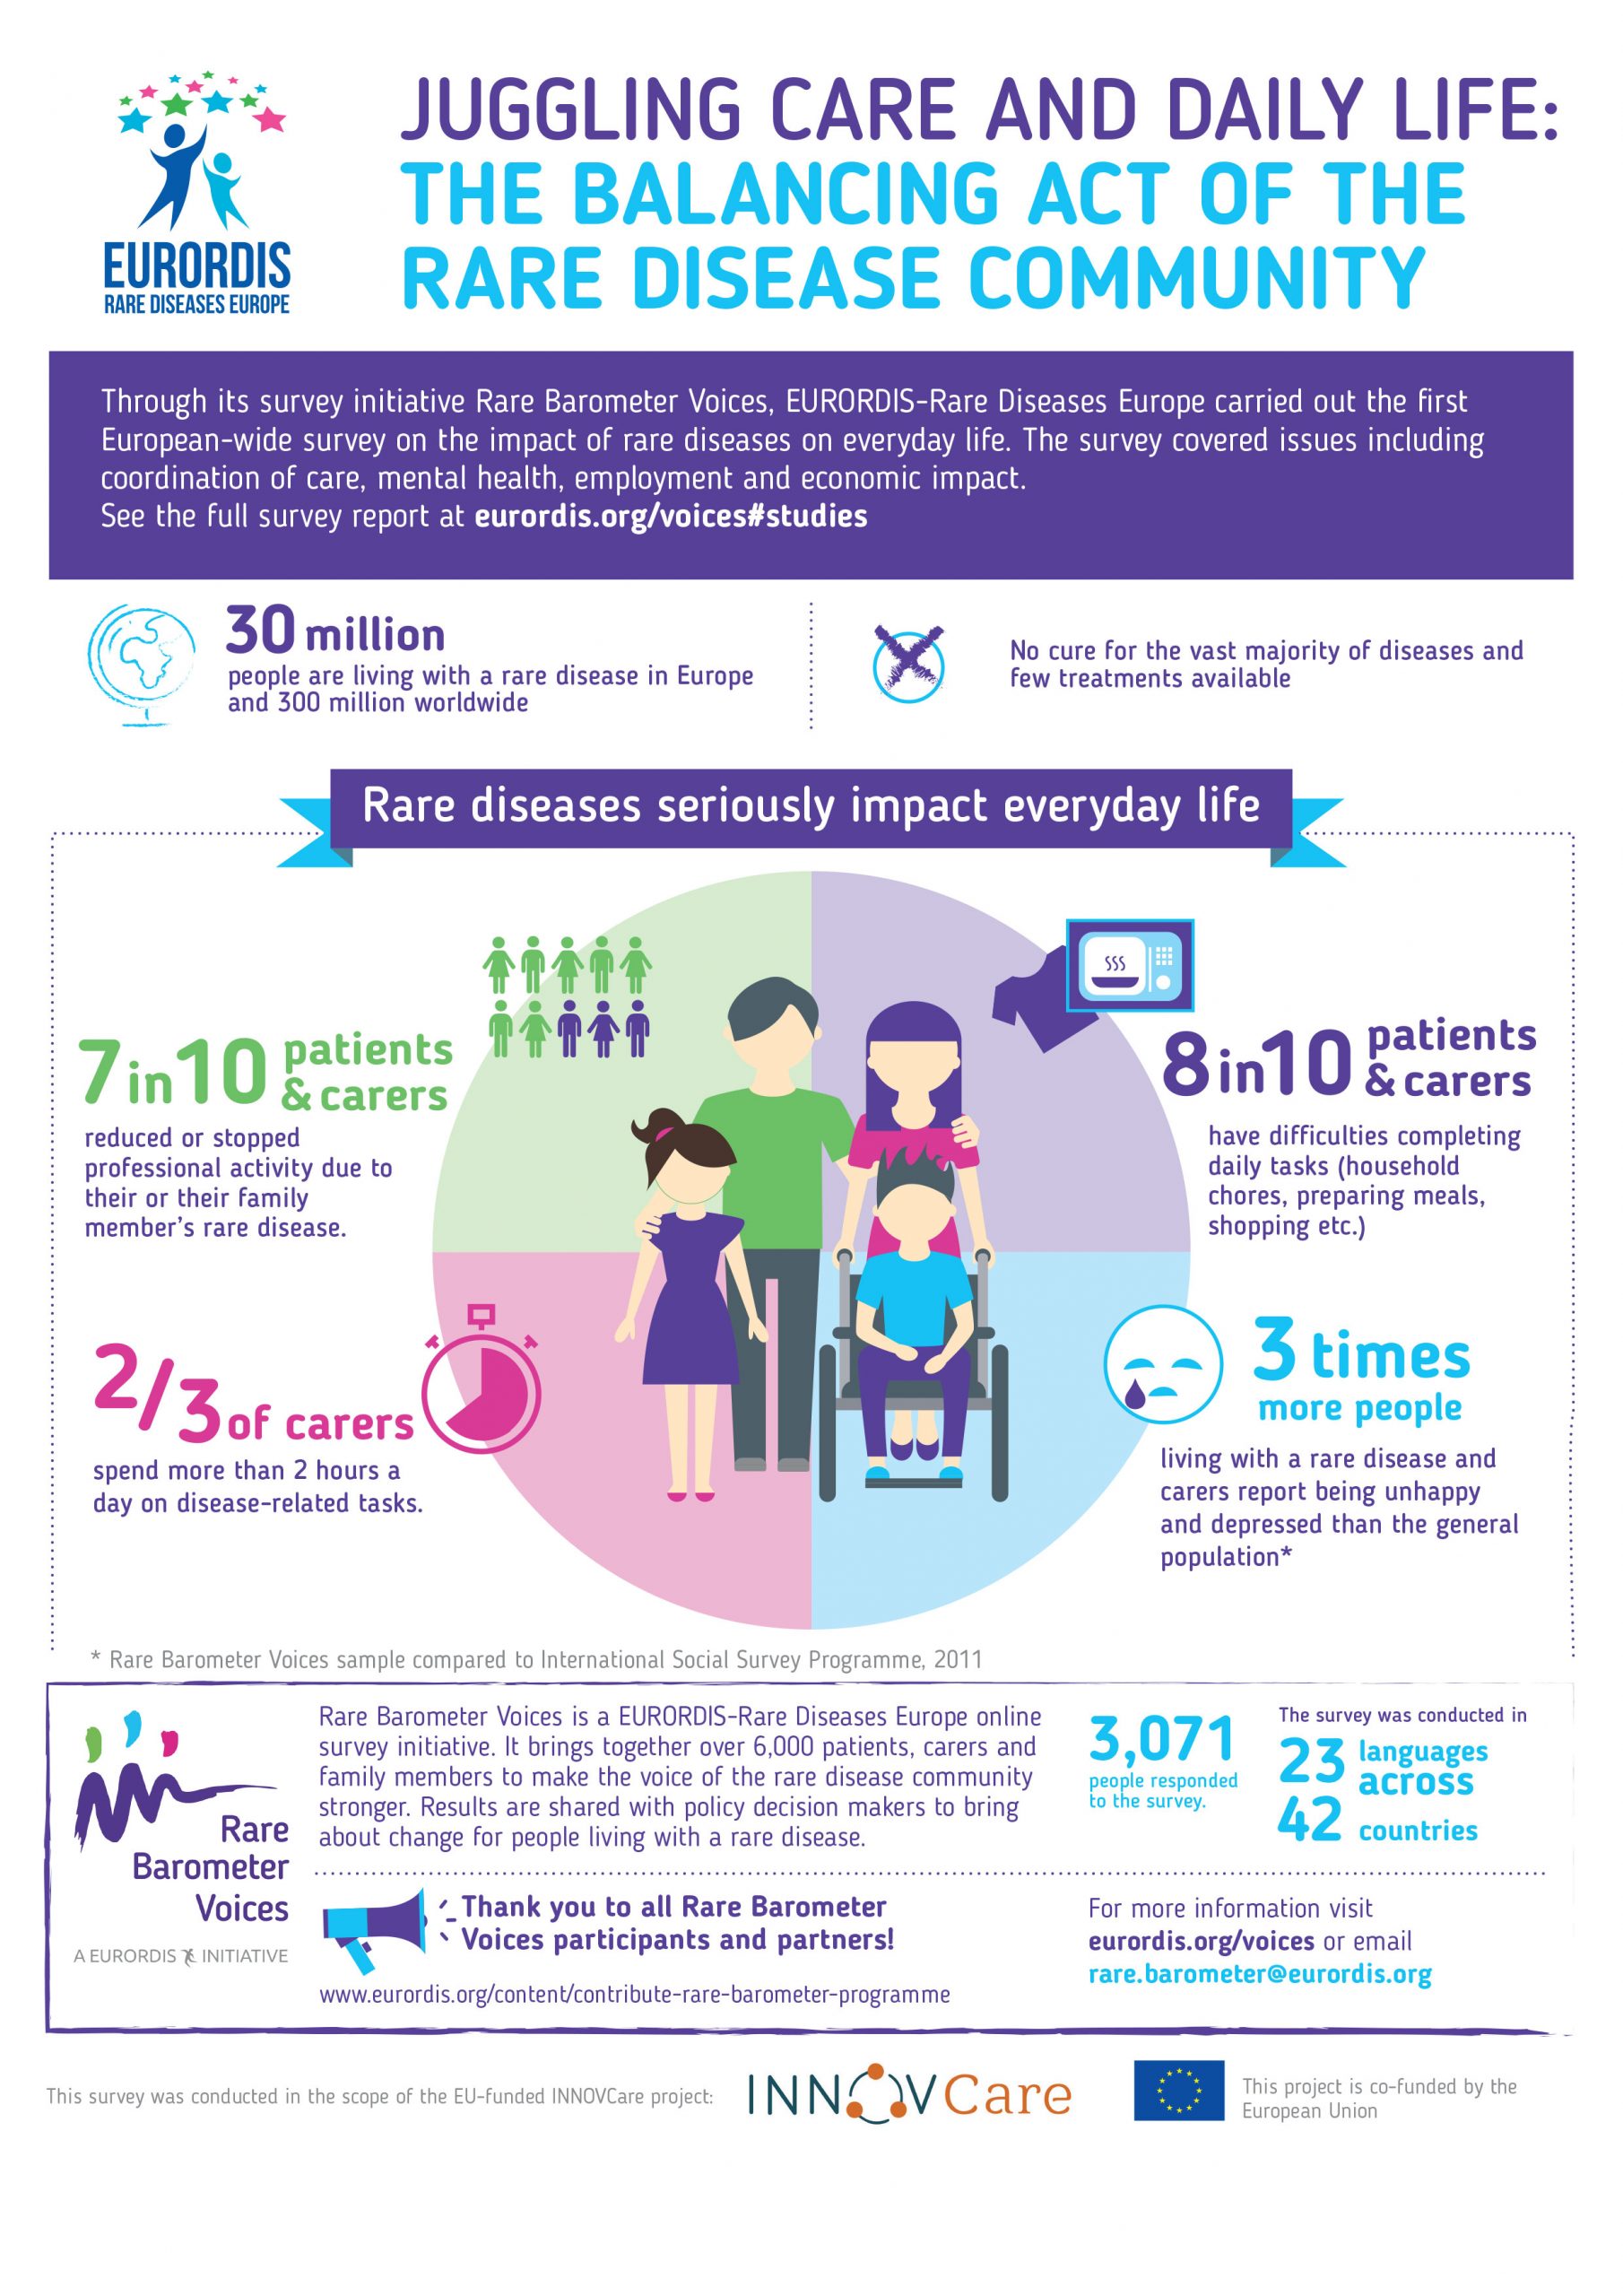 Juggling care and daily life: The balancing act of the rare disease community — Infographic